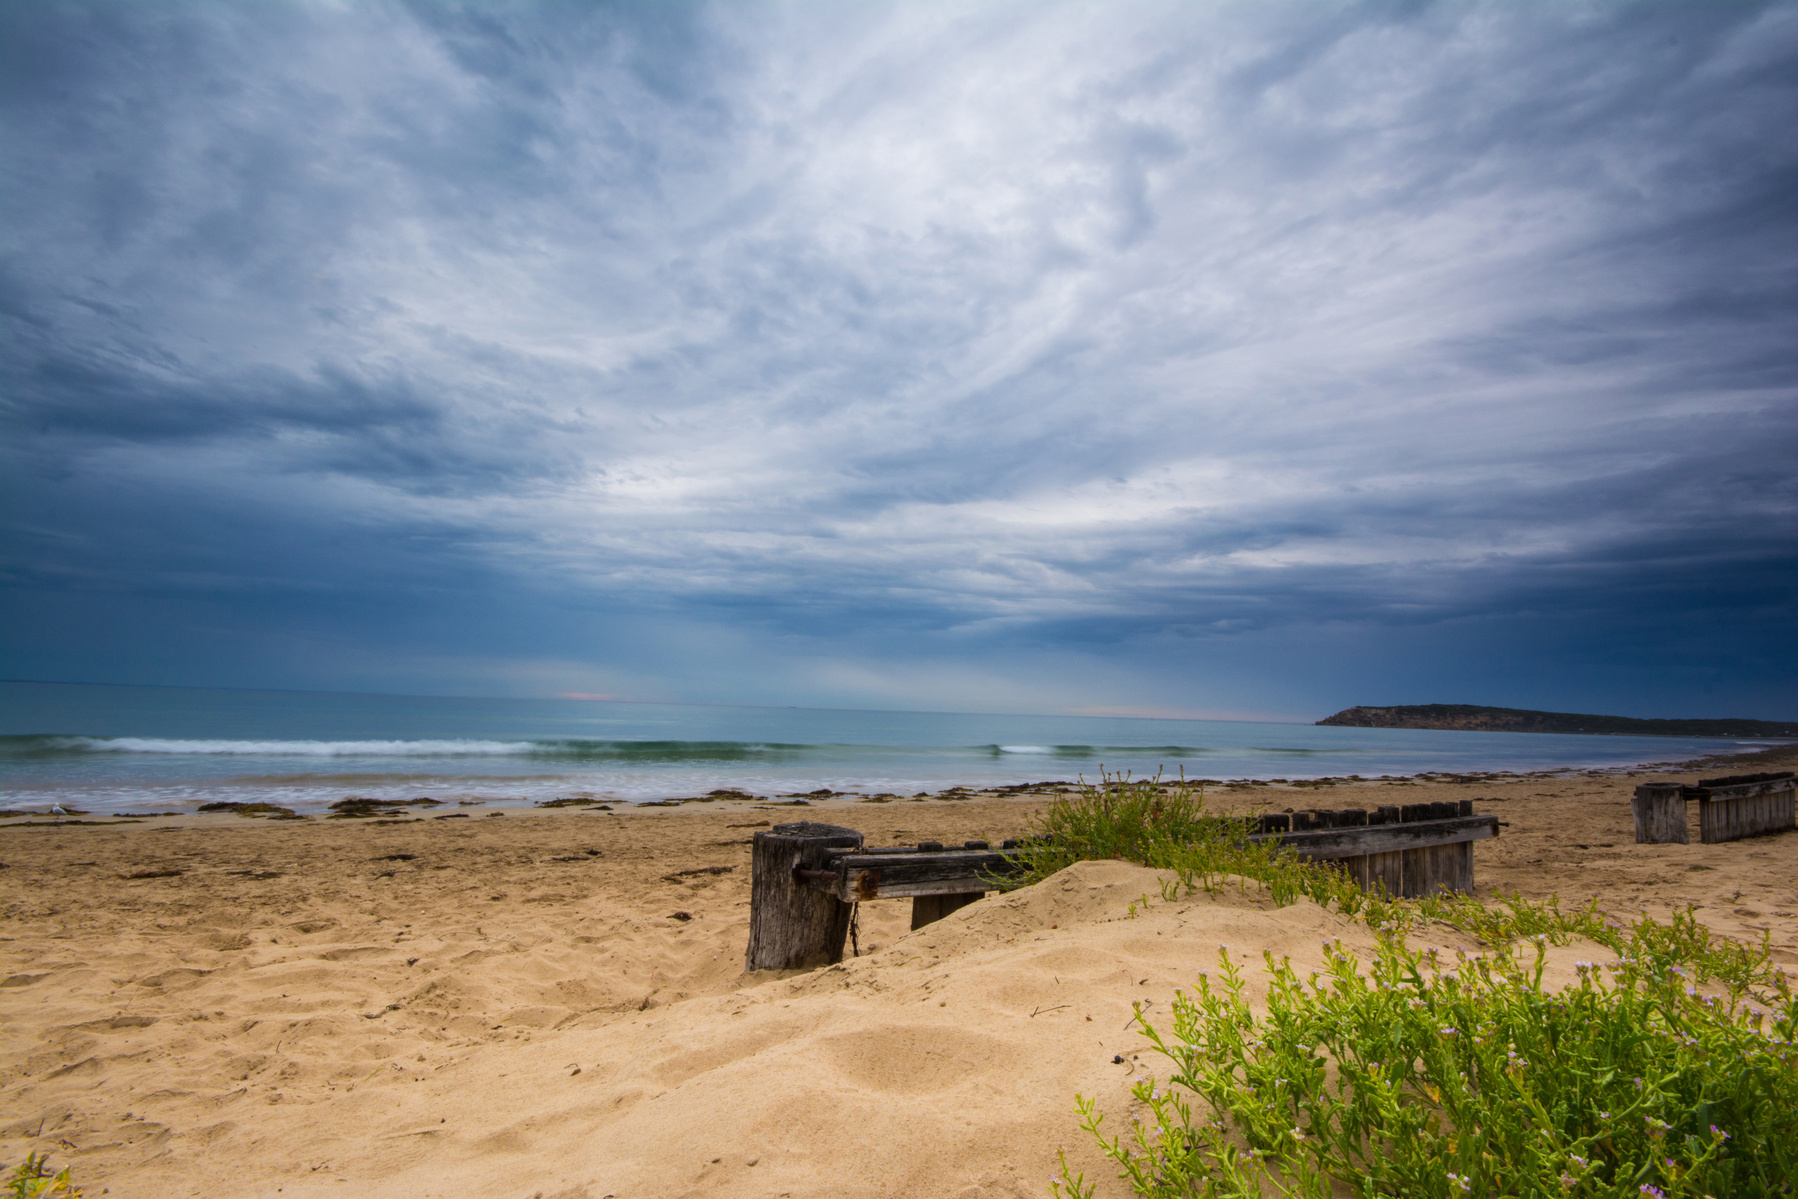 Beach at Ocean Grove Victoria with stormy sky. Photo taken by planetdesigns.net